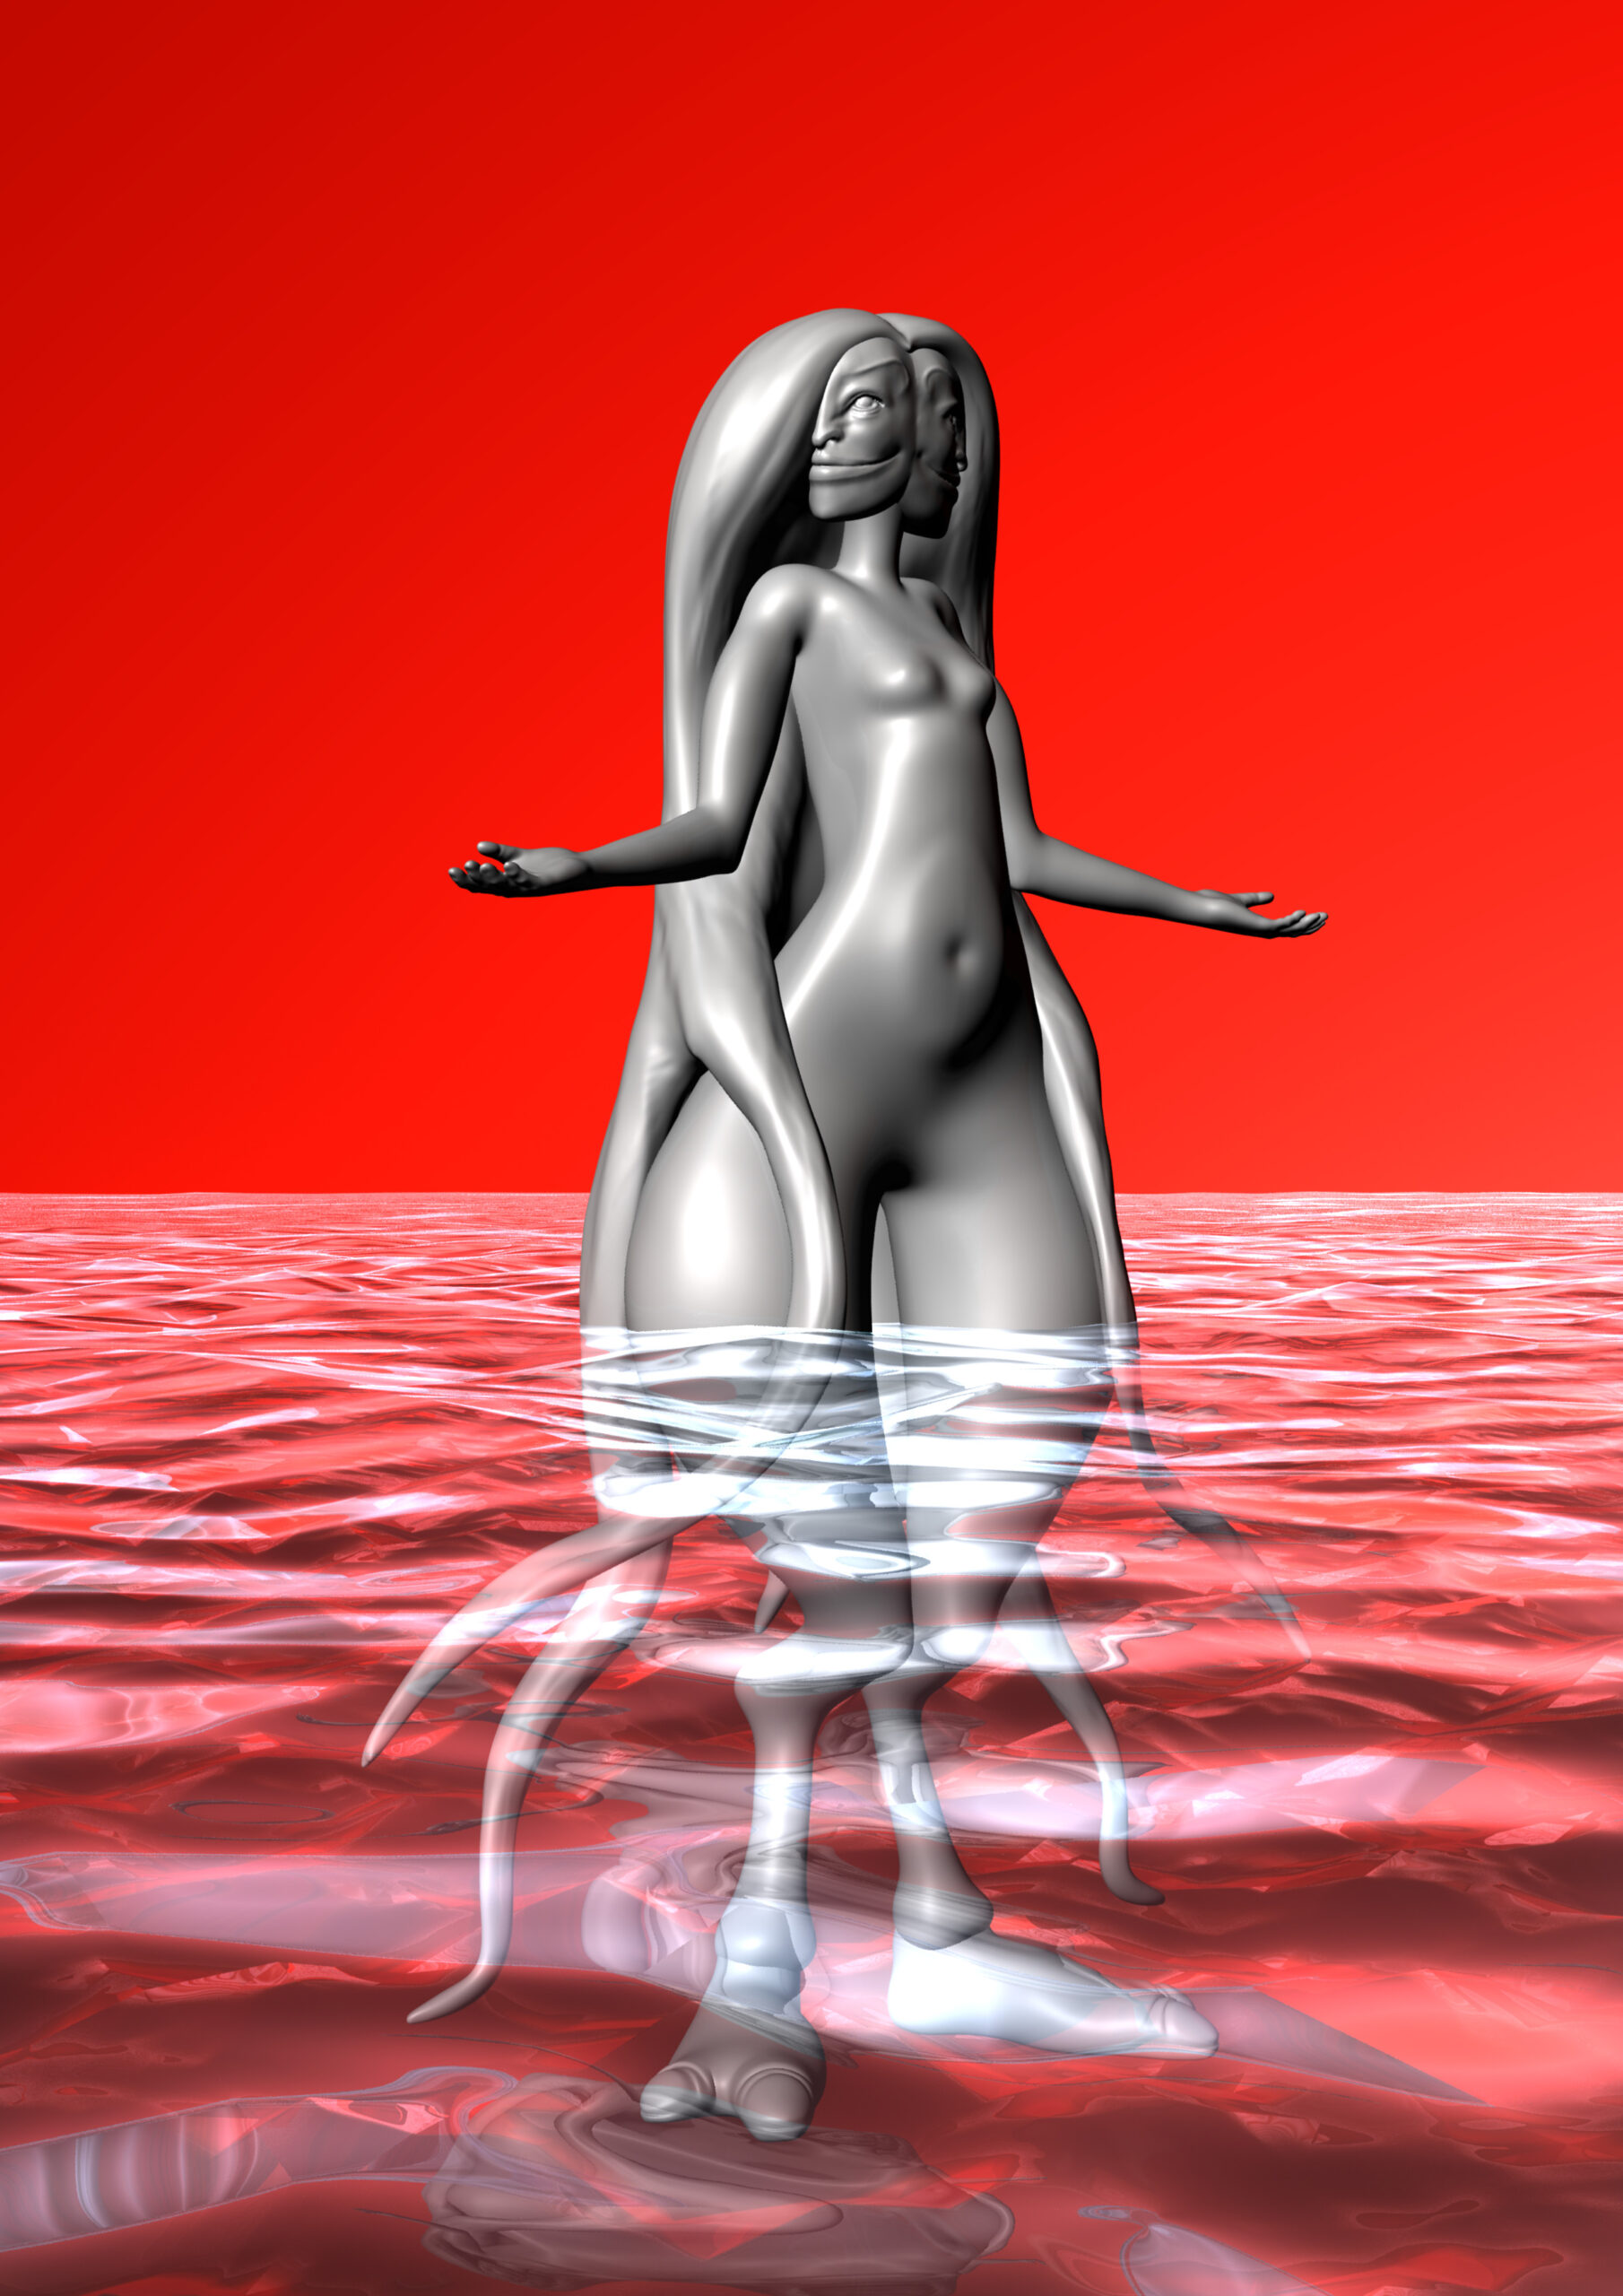 Image of a figure with two faces standing in liquid in front of a red back round